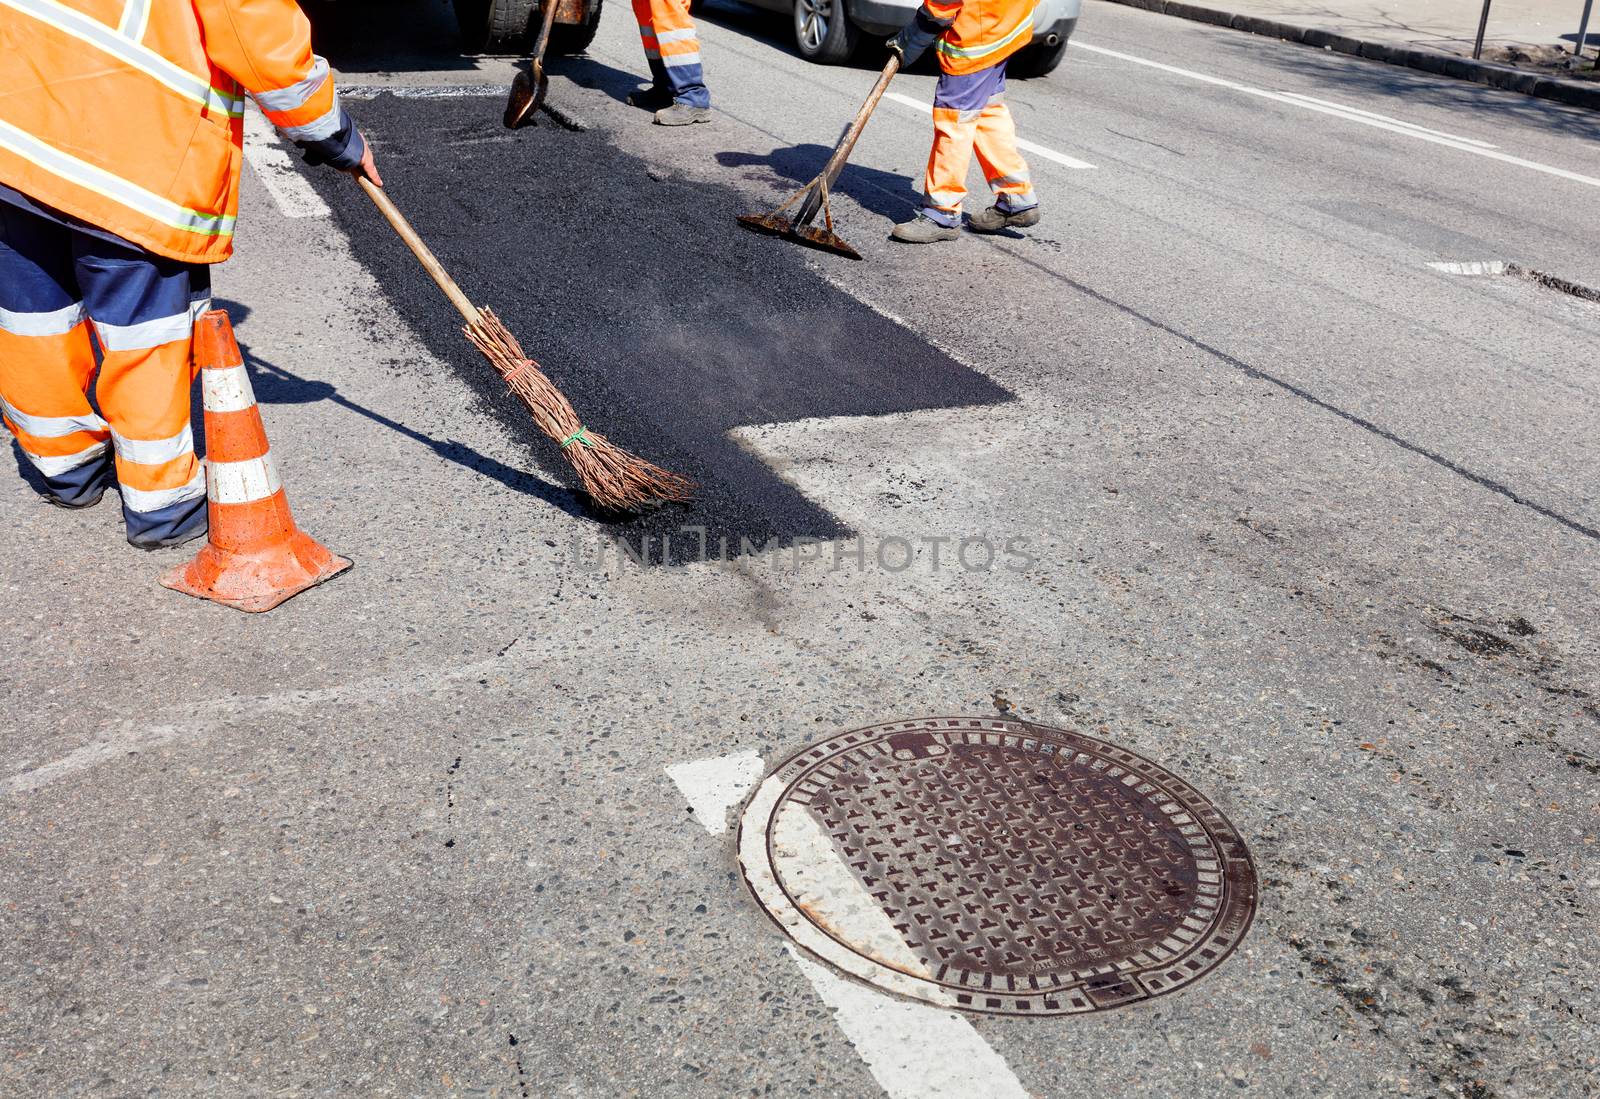 When repairing the road, the working team pours hot asphalt onto even patches with shovels, a level and a broom manually. by Sergii